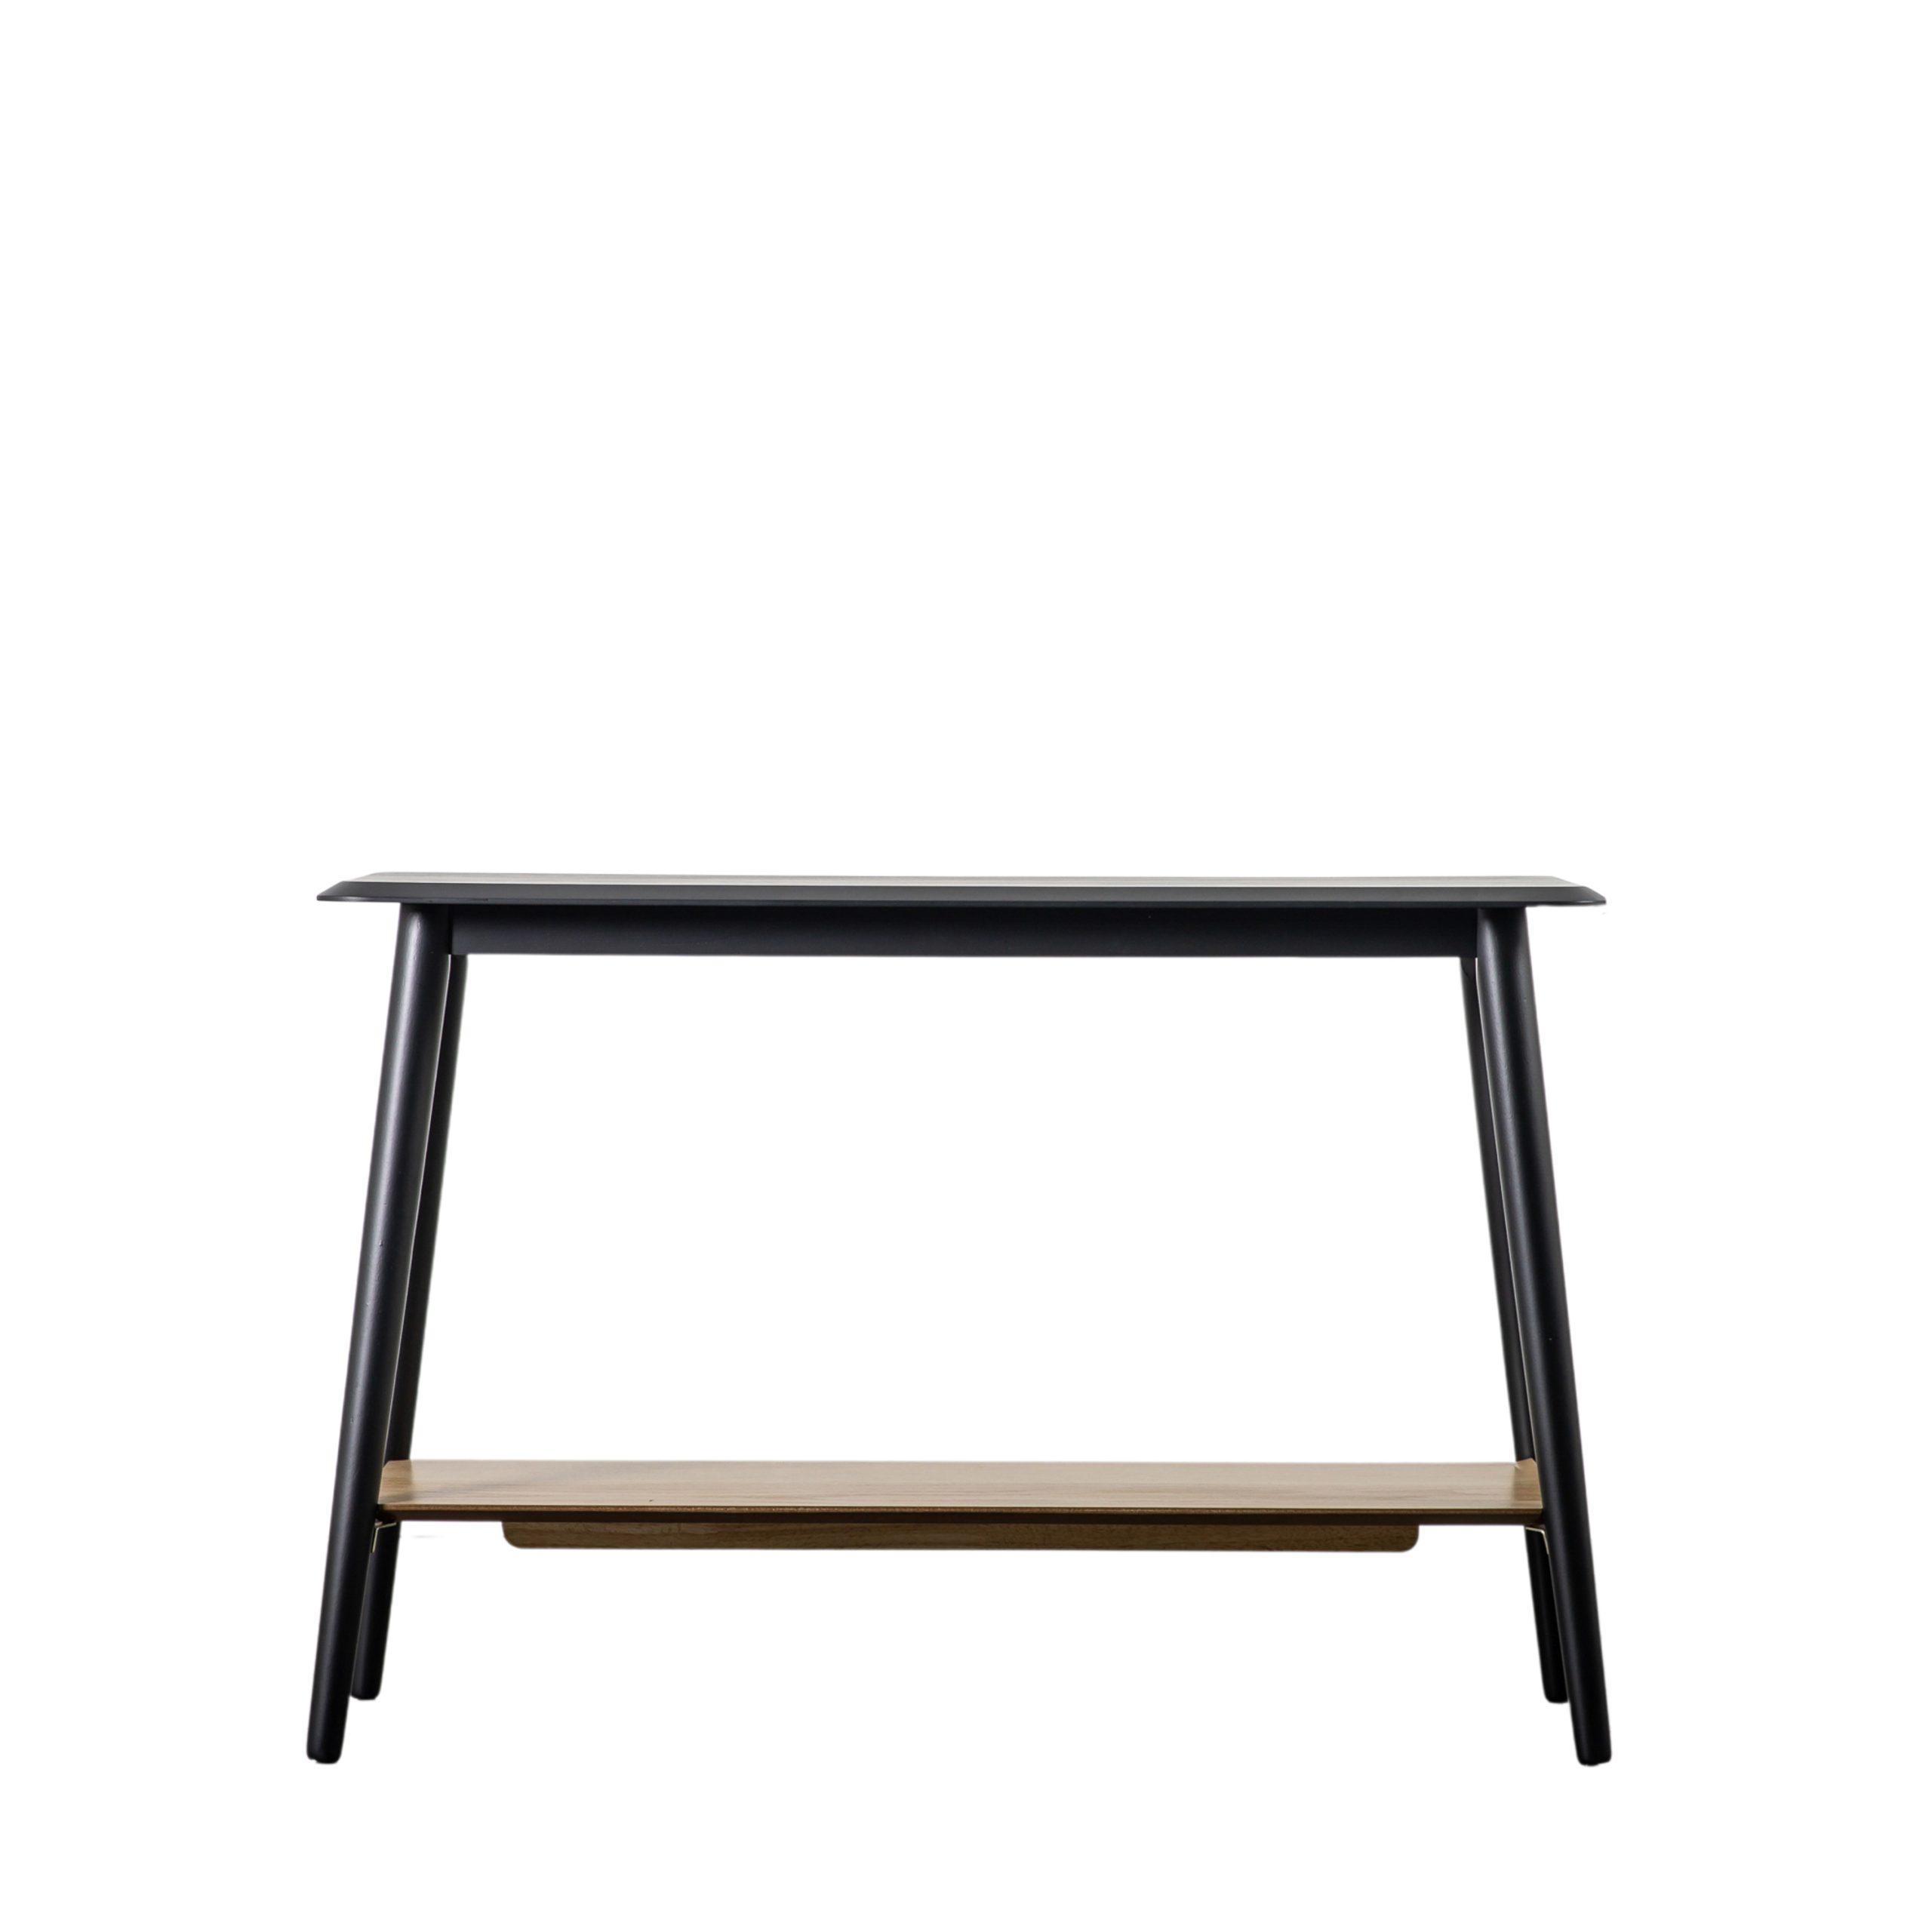 Gallery Direct Maddox Console Table with Shelf